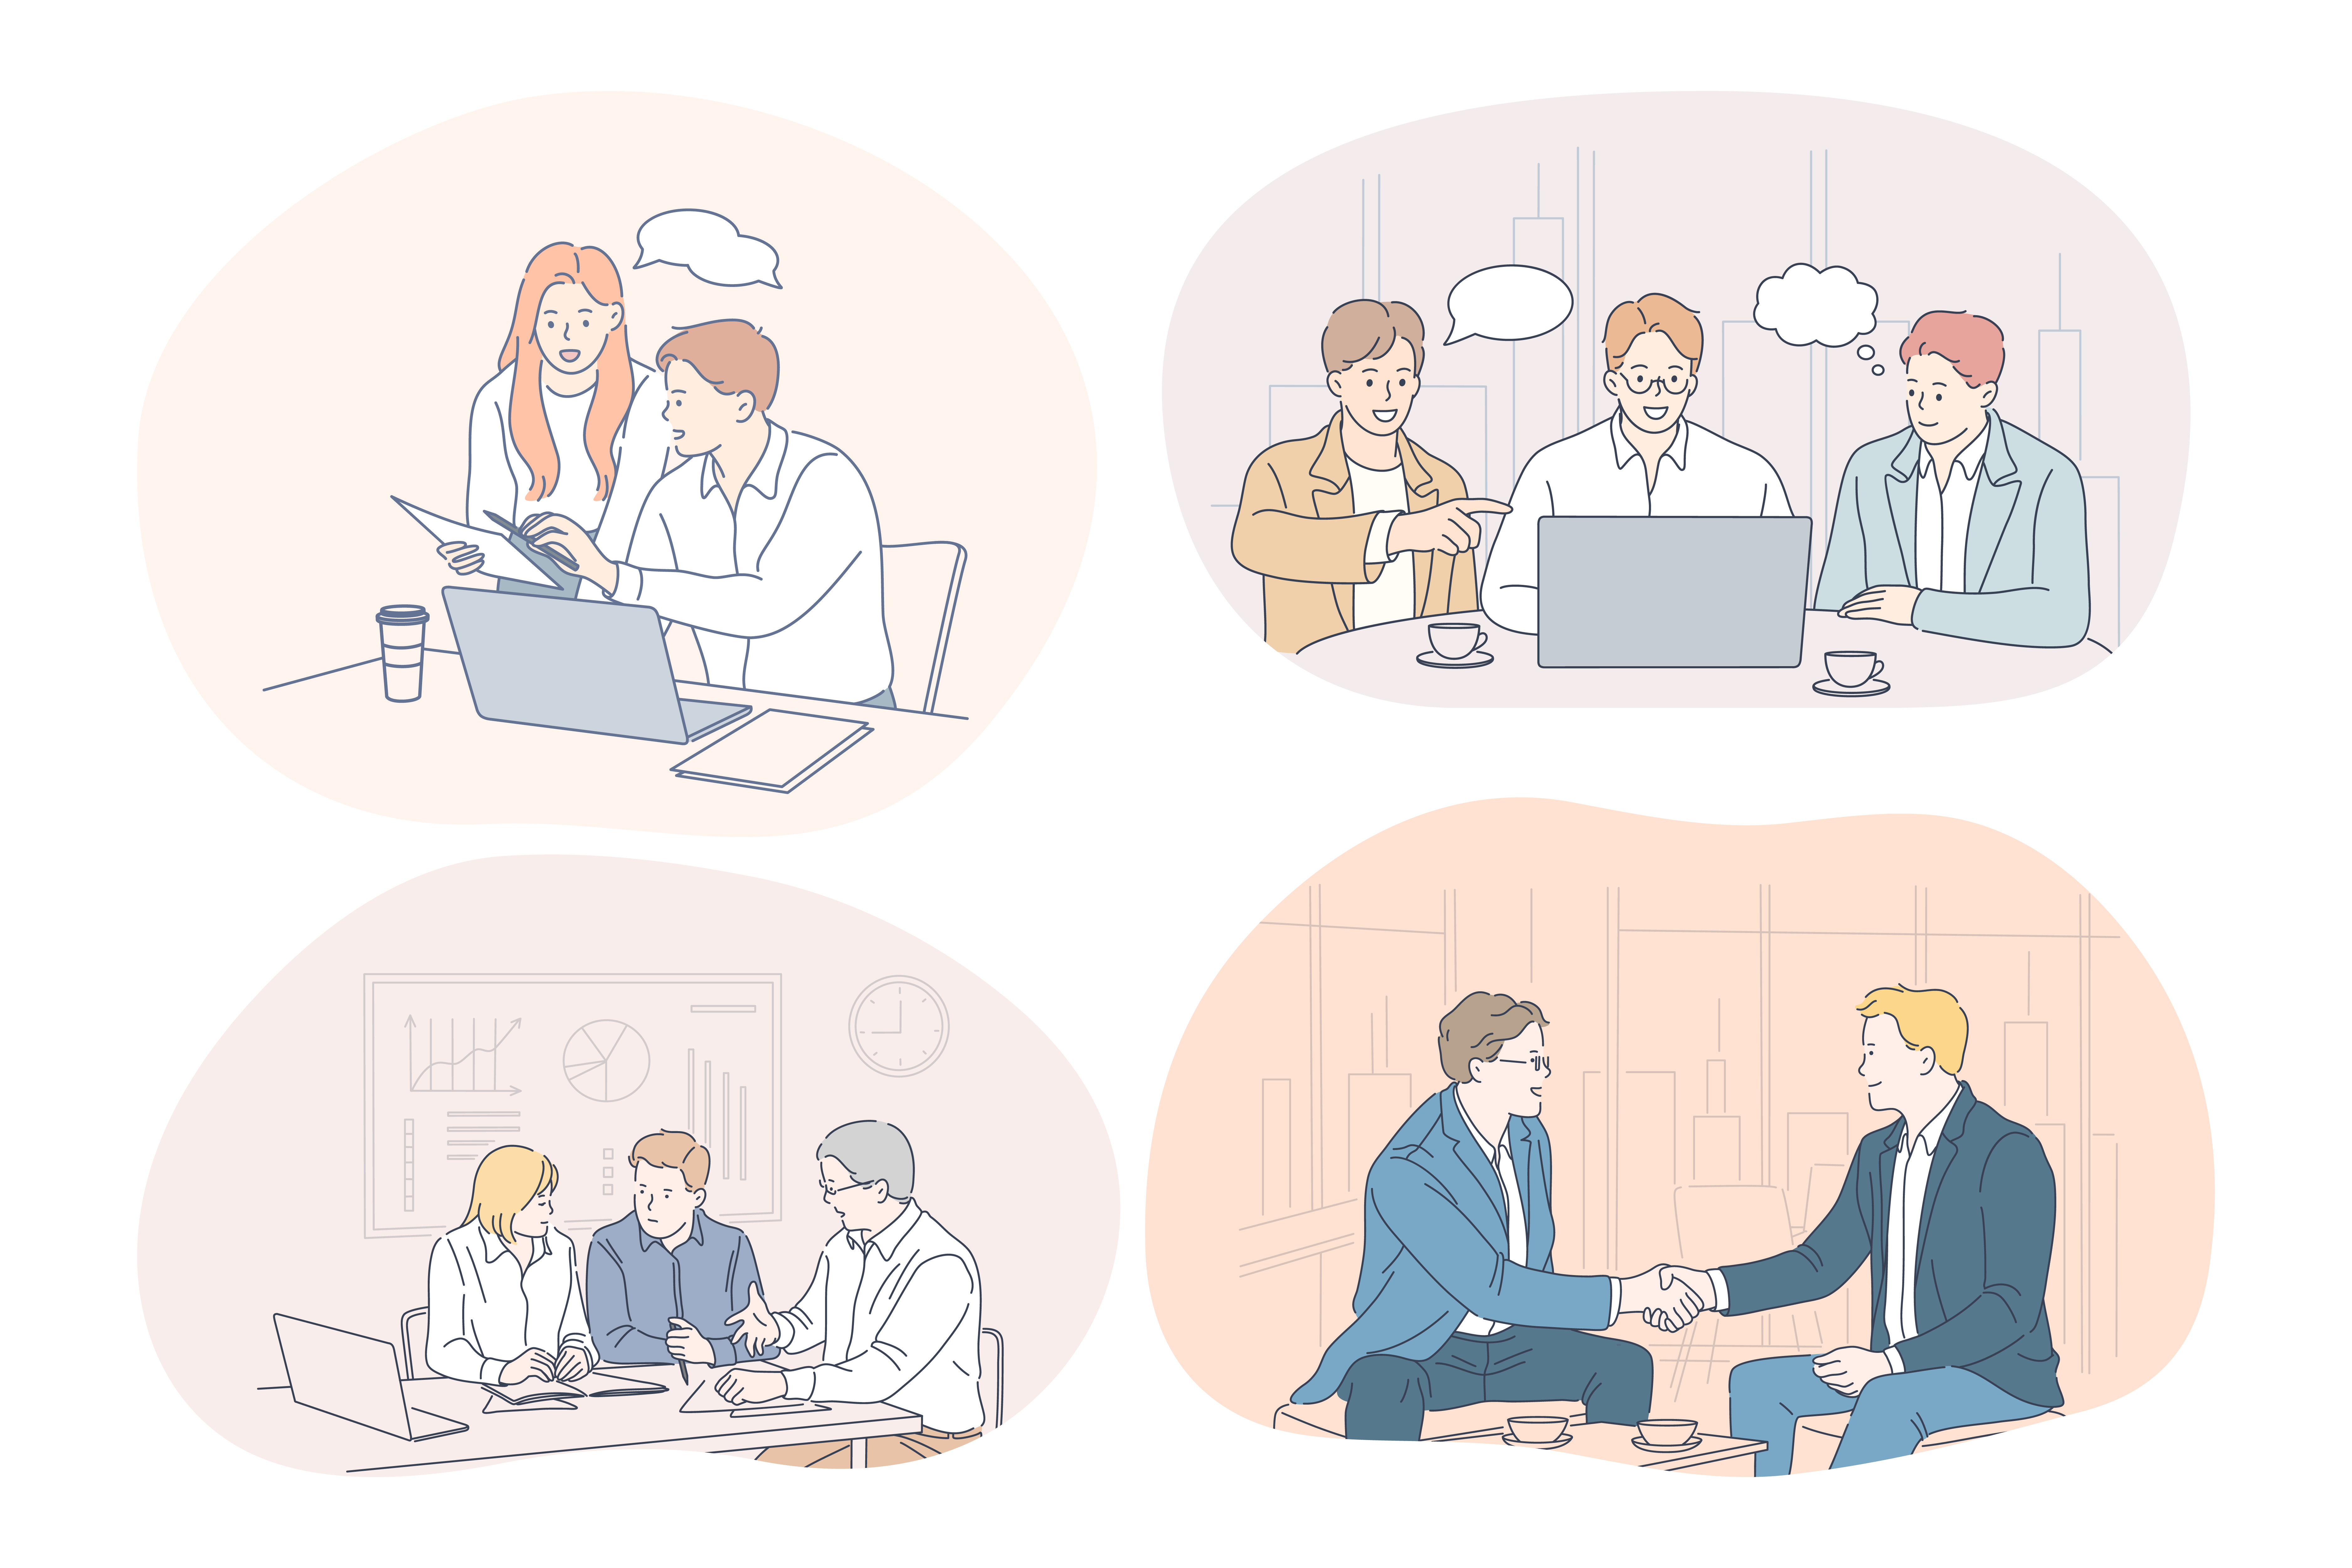 Teamwork, brainstorming, business, negotiations, deal, office, collaboration concept. Business people partners coworkers discussing projects and startups together in office, having brainstorming . Teamwork, brainstorming, business, negotiations, deal, office, collaboration concept